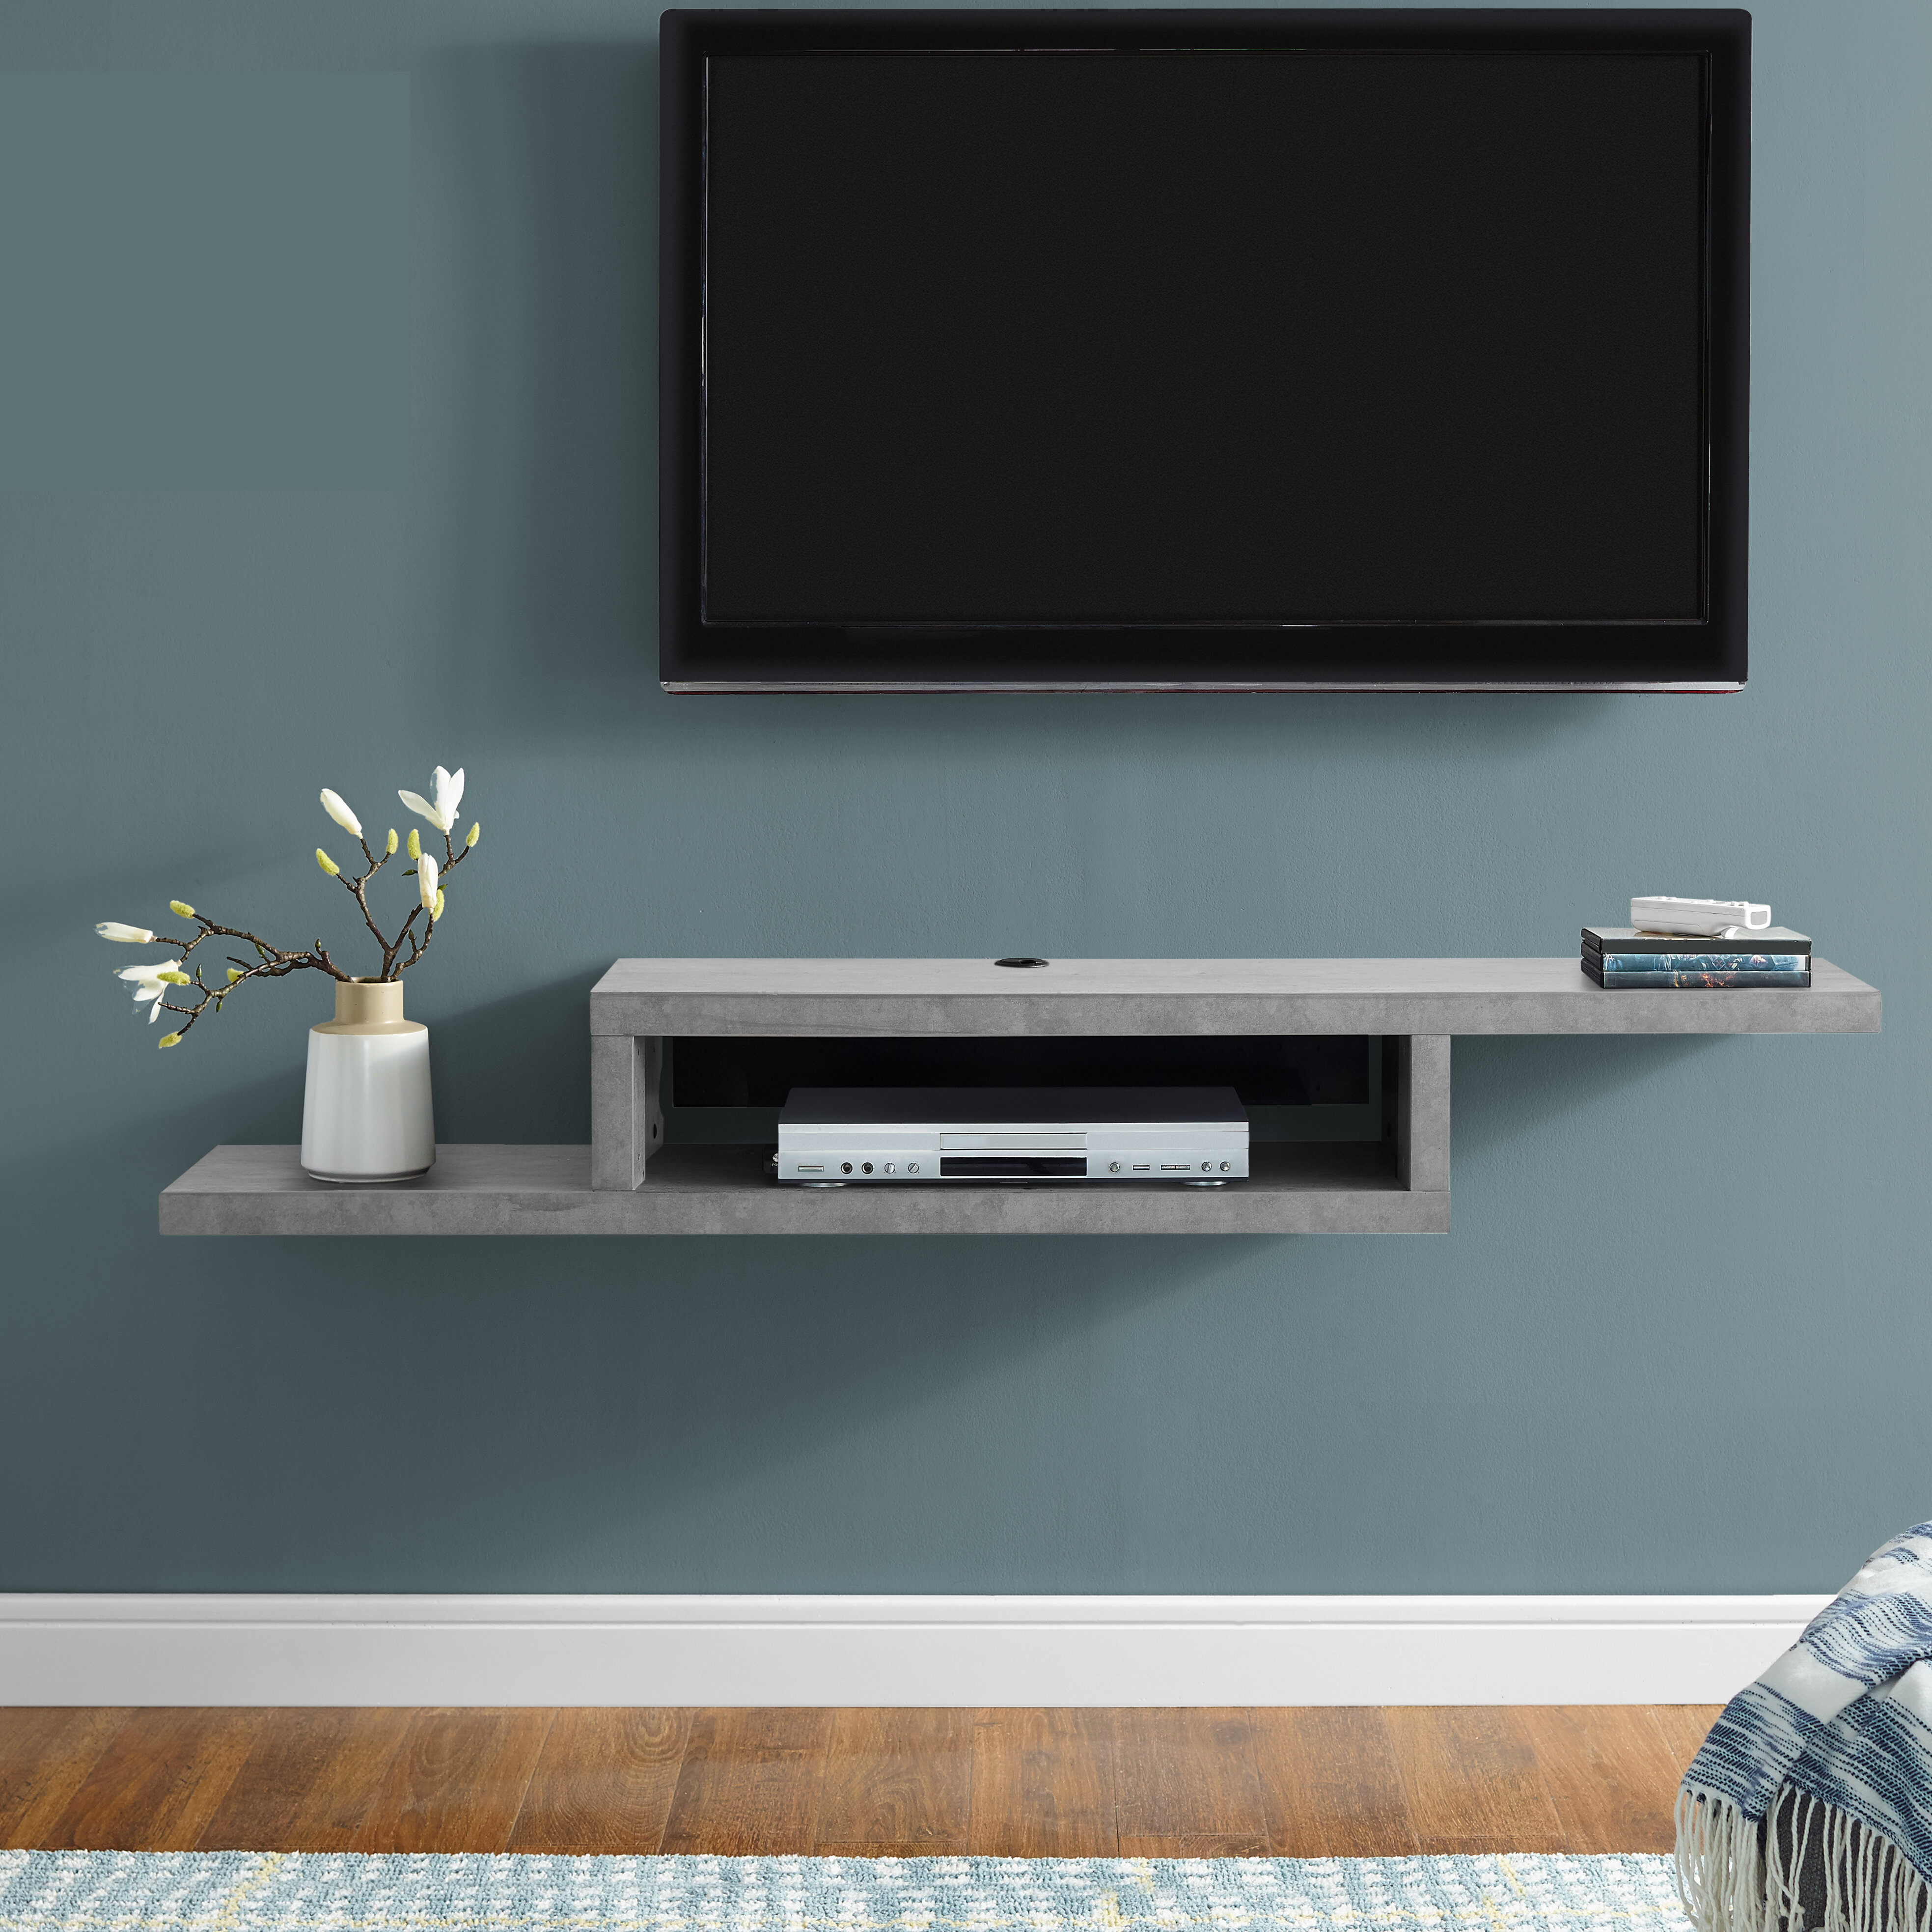 TV Floating Shelf Shelves Stand Wall Mount Console Media Furniture Entertainment for sale online 